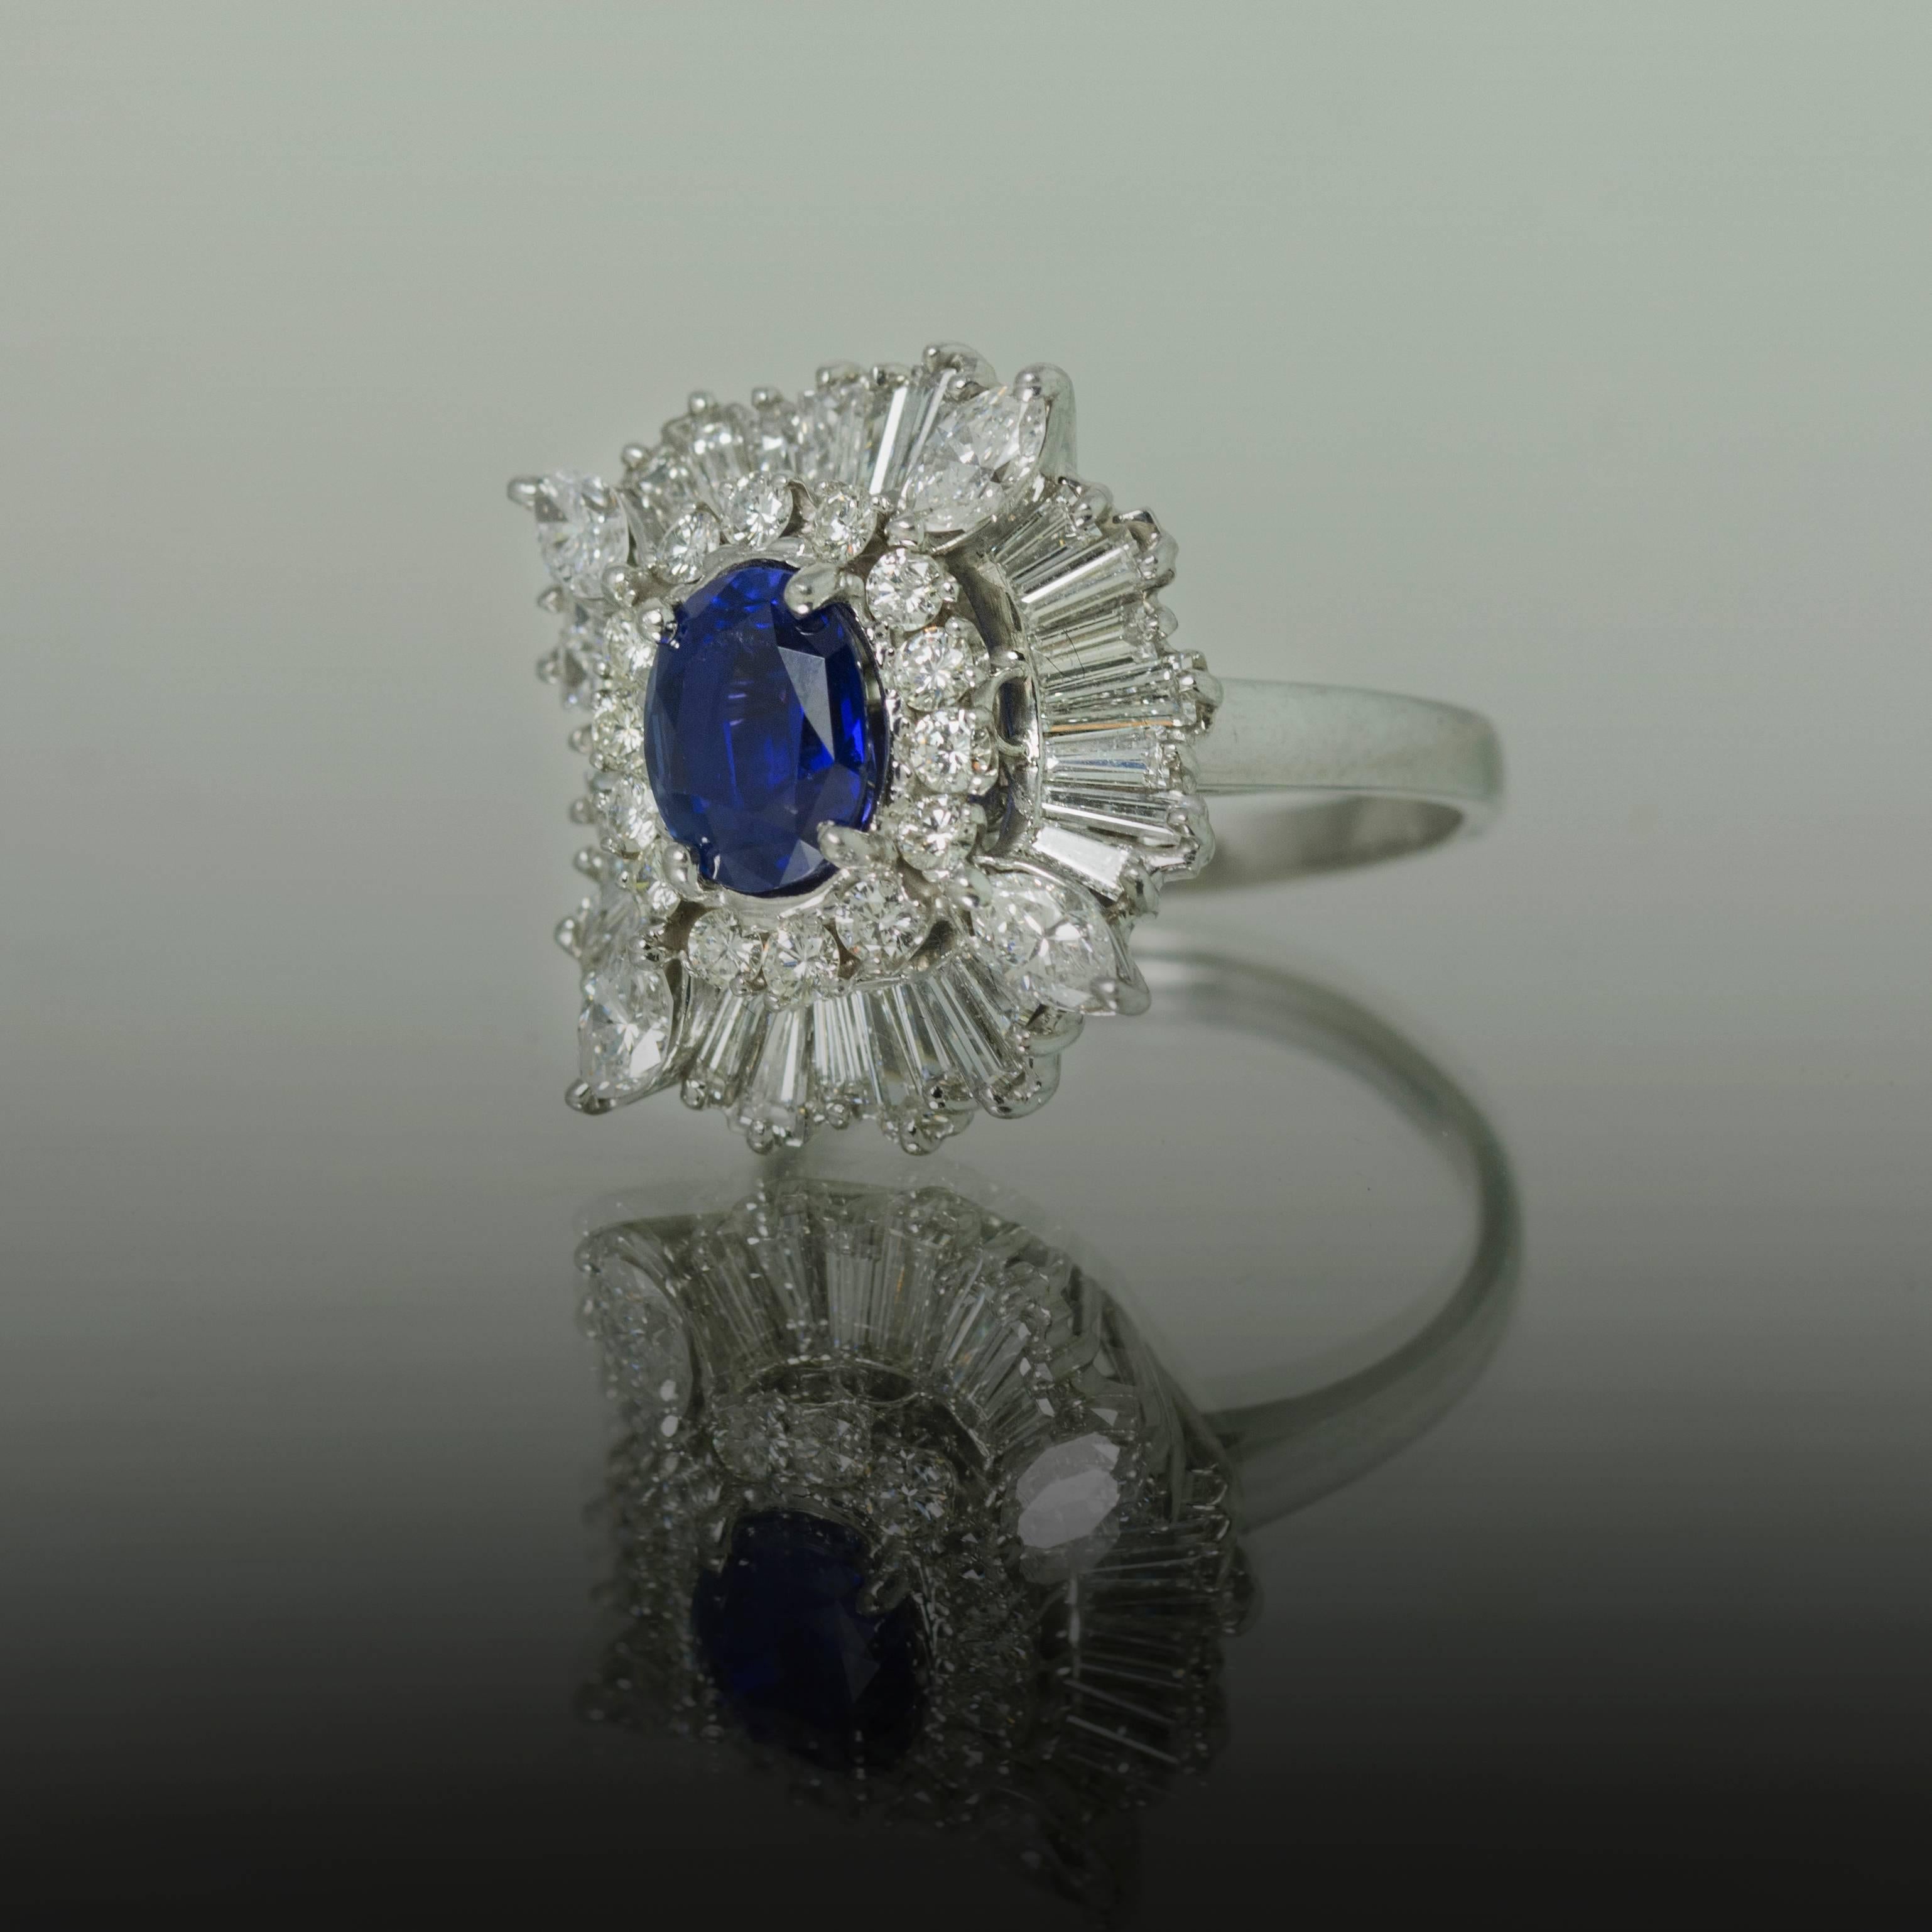 Platinum Ring with 1 Royal Blue Ceylon Sapphire weighing 2.61 carats and high color, high clarity tampered baguette and modern round brilliant diamonds weighing approximately 4.16 carats.